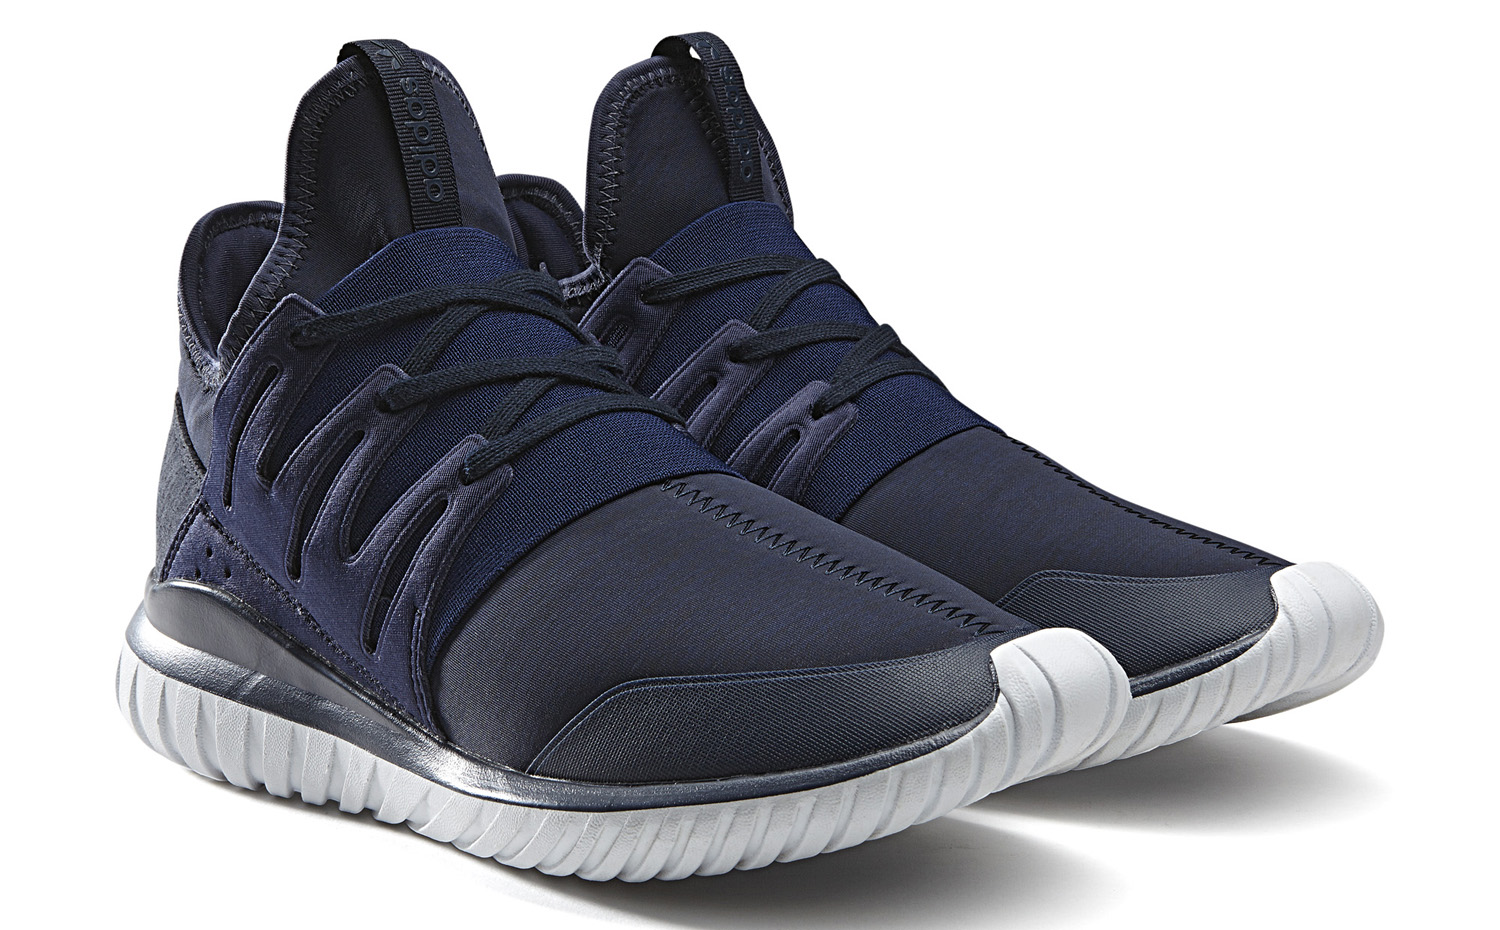 Adidas Brings Out Two More Tubular Releases | Sole Collector